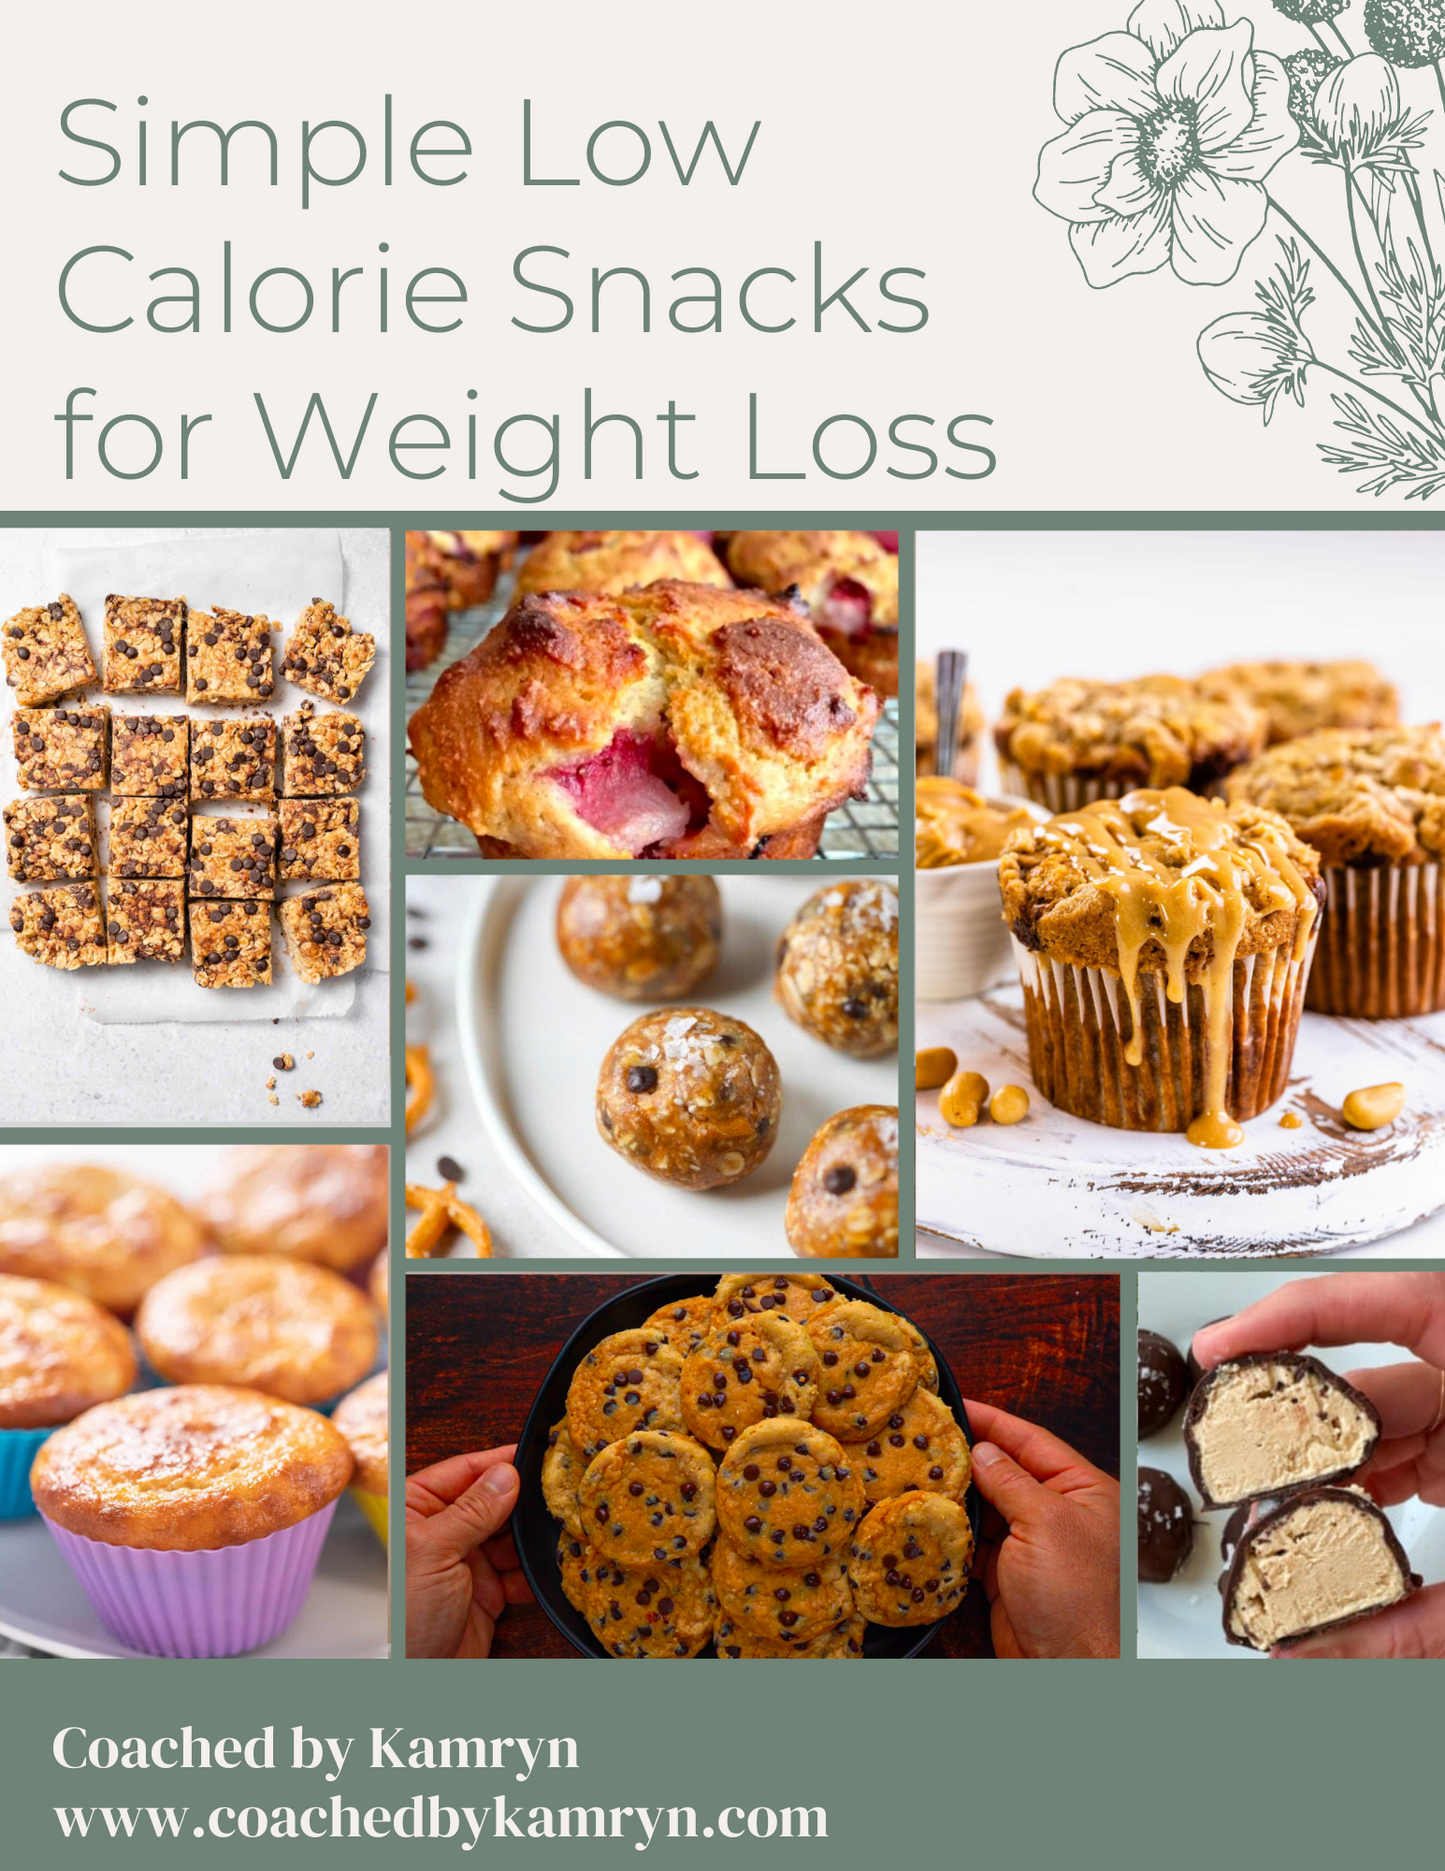 Simple Low Calorie Snacks for Weight Loss